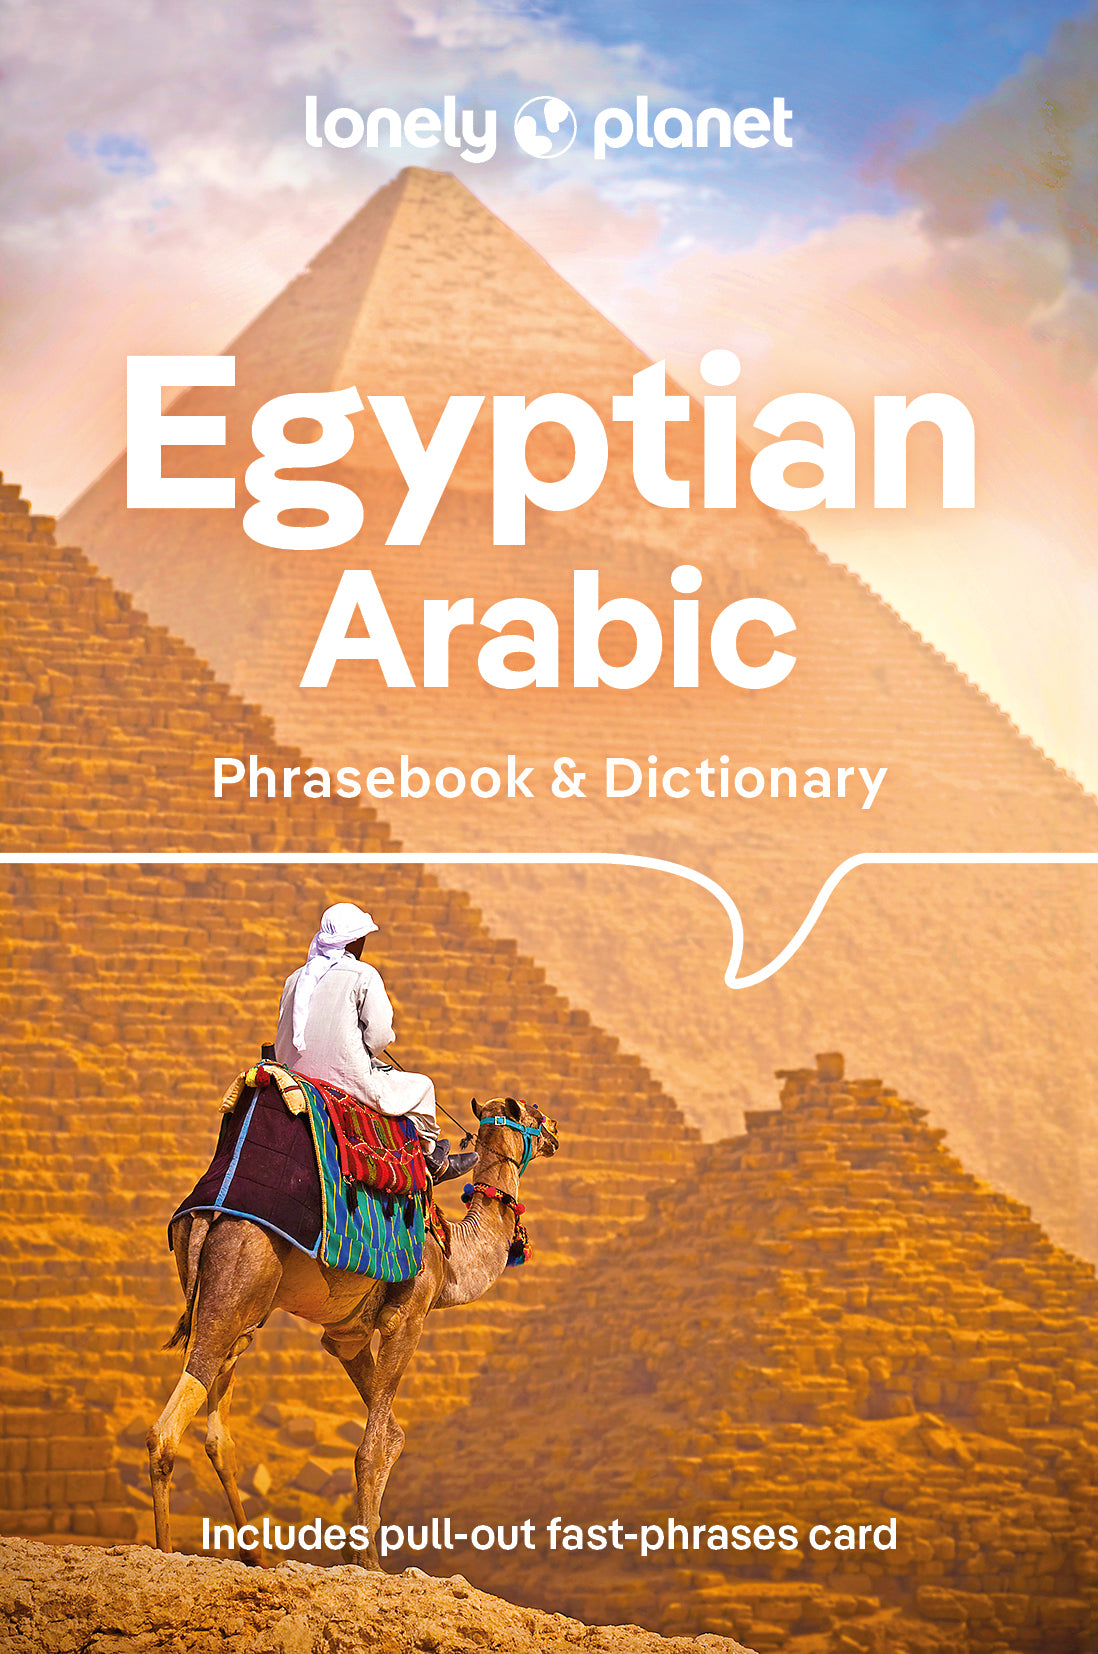 Lonely Planet's Egyptian Arabic Phrasebook and Dictionary and eBook